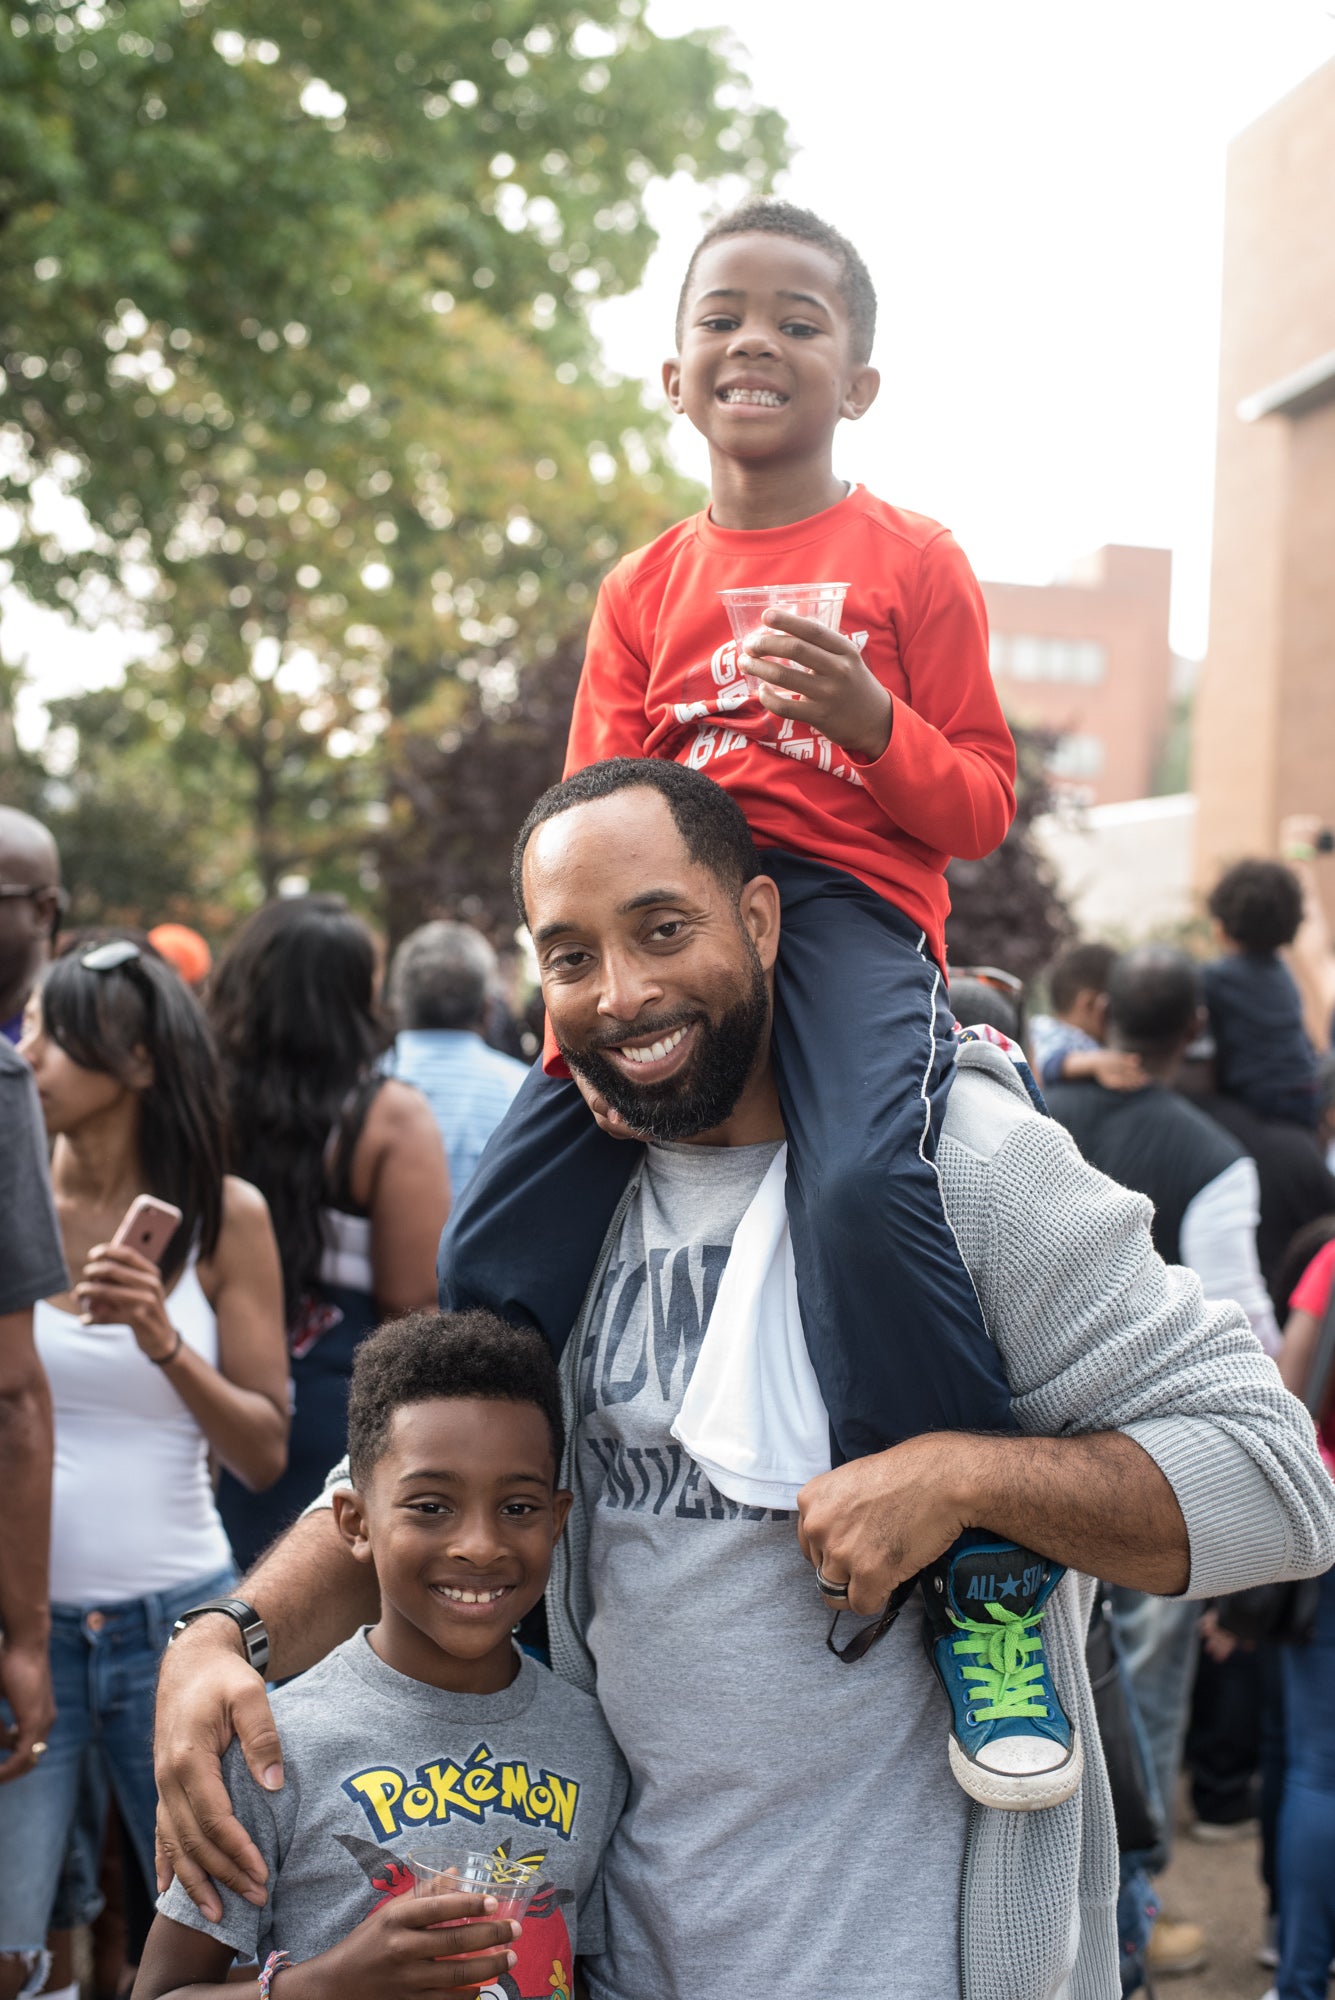 2017 Howard Homecoming Certainly Was A Family Affair
